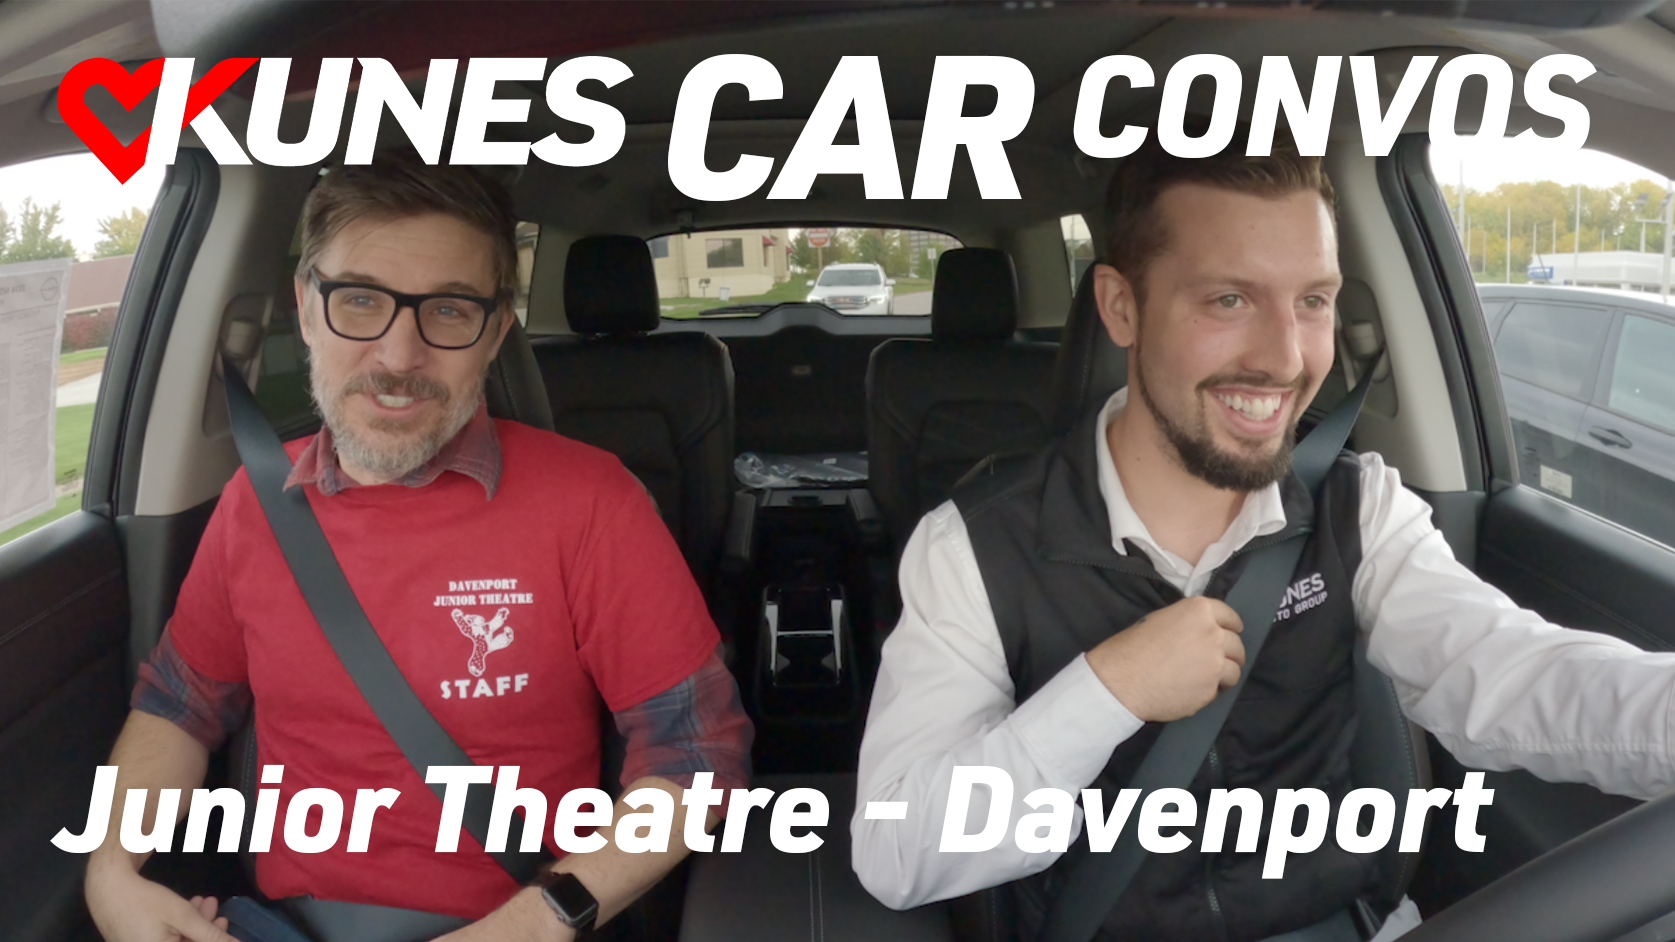 Pictured from left to right: Daniel Sheridan, Performing Arts Supervisor at Davenport Junior Theatre, and Tony Tucker, Sales Representative at Kunes Nissan of Davenport; Text reads: Kunes Car Convos; Junior Theatre - Davenport